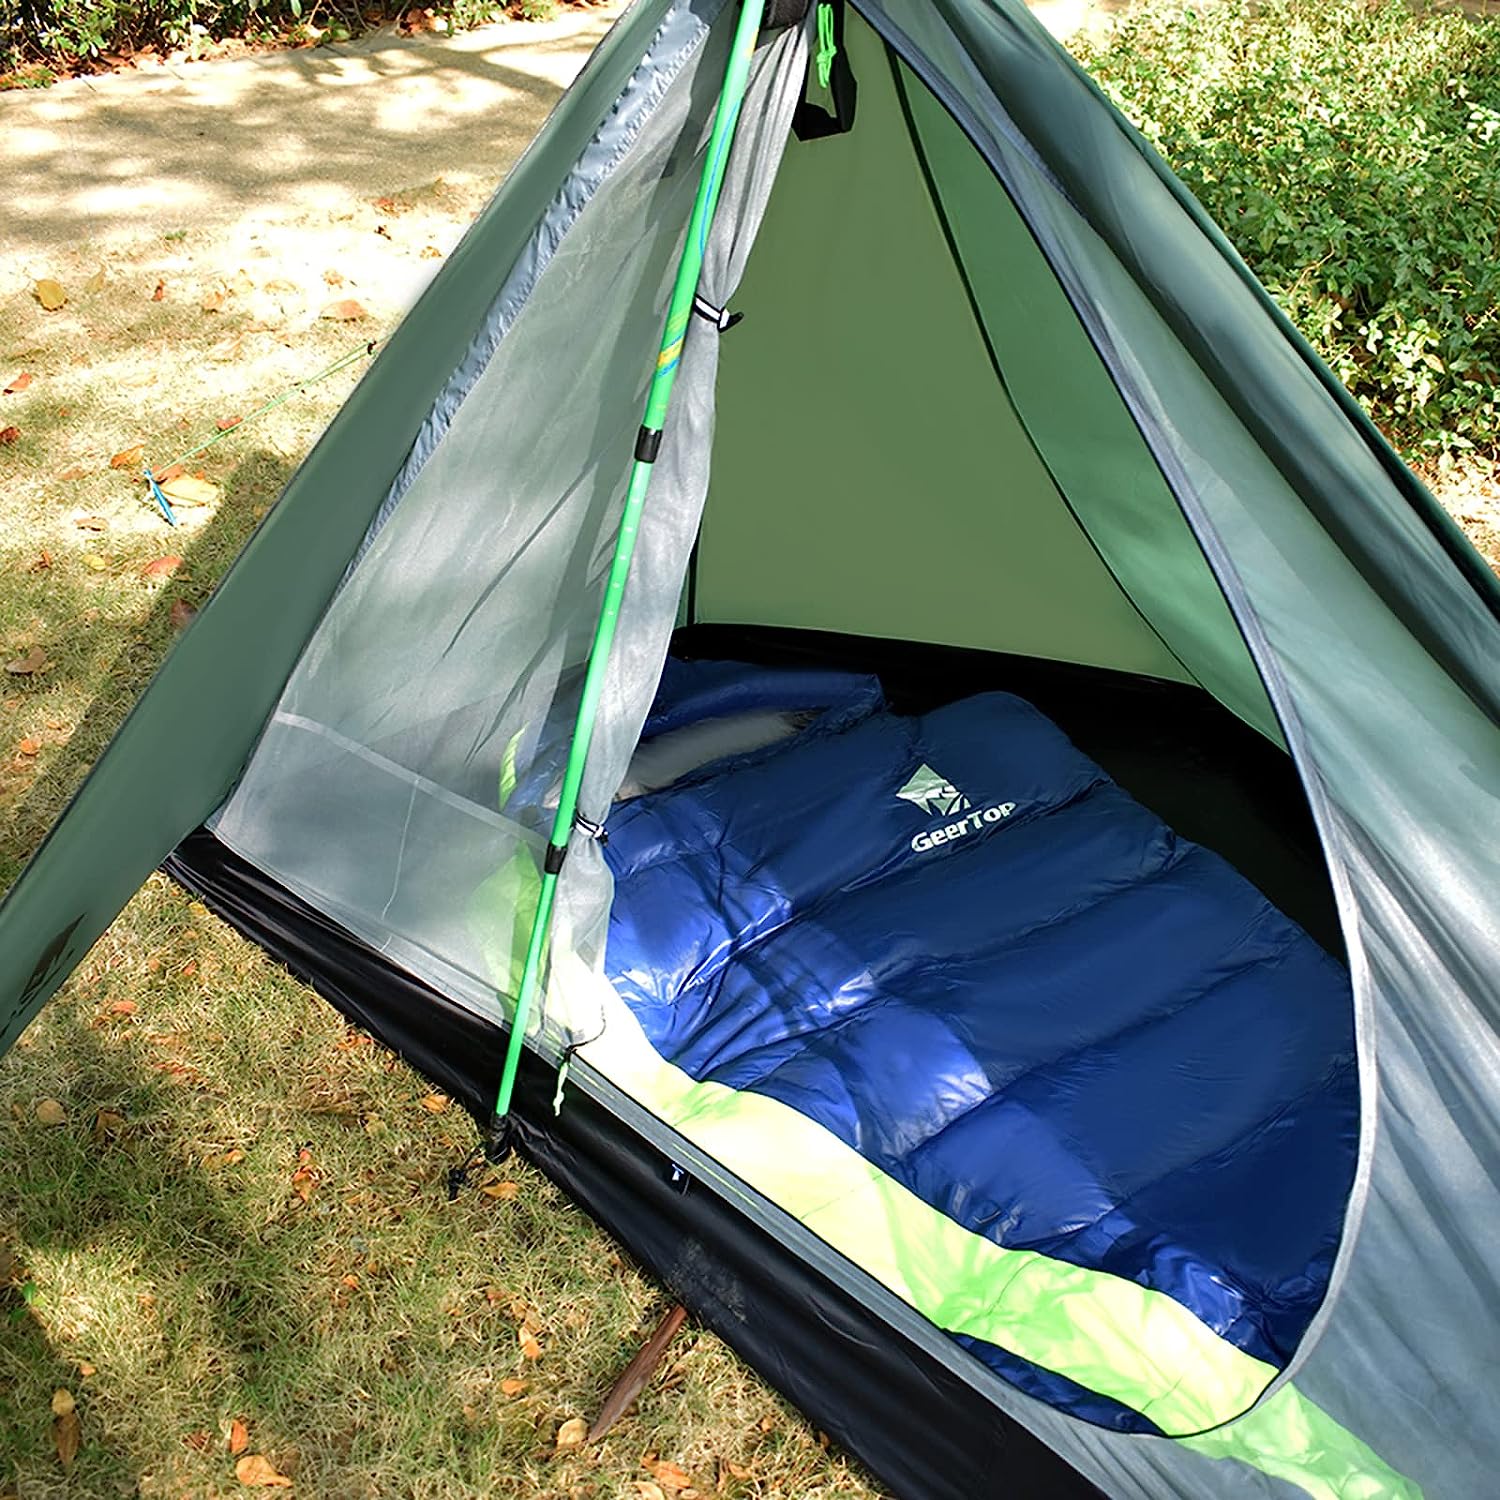 GeerTop One Person 3 Season Camping Backpacking Tent